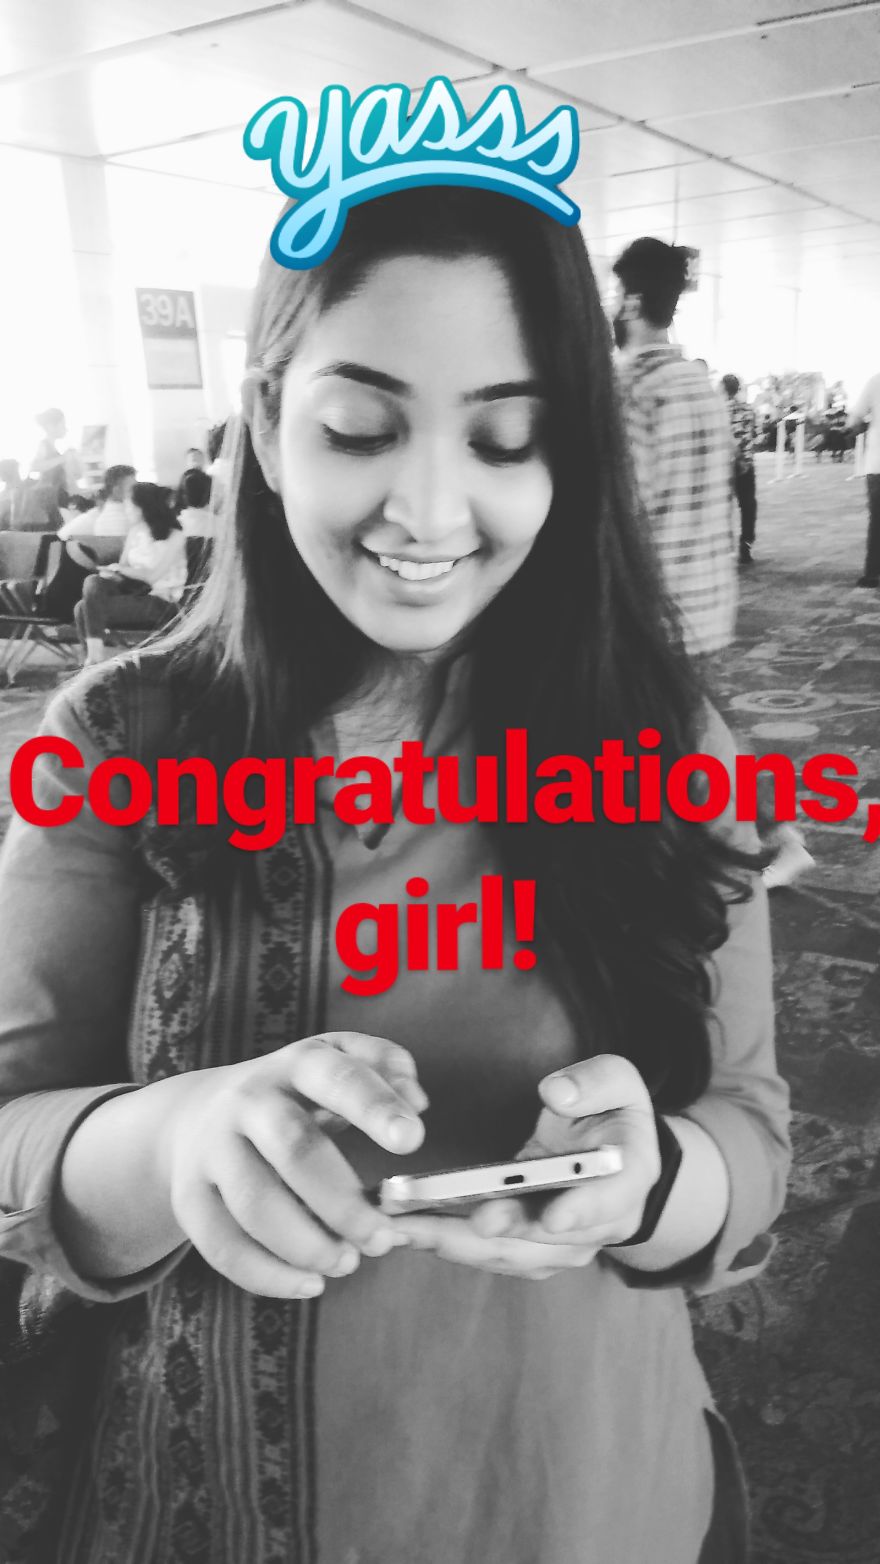 My Elder Sister Is Leaving For College... This Was My "Congratulations"